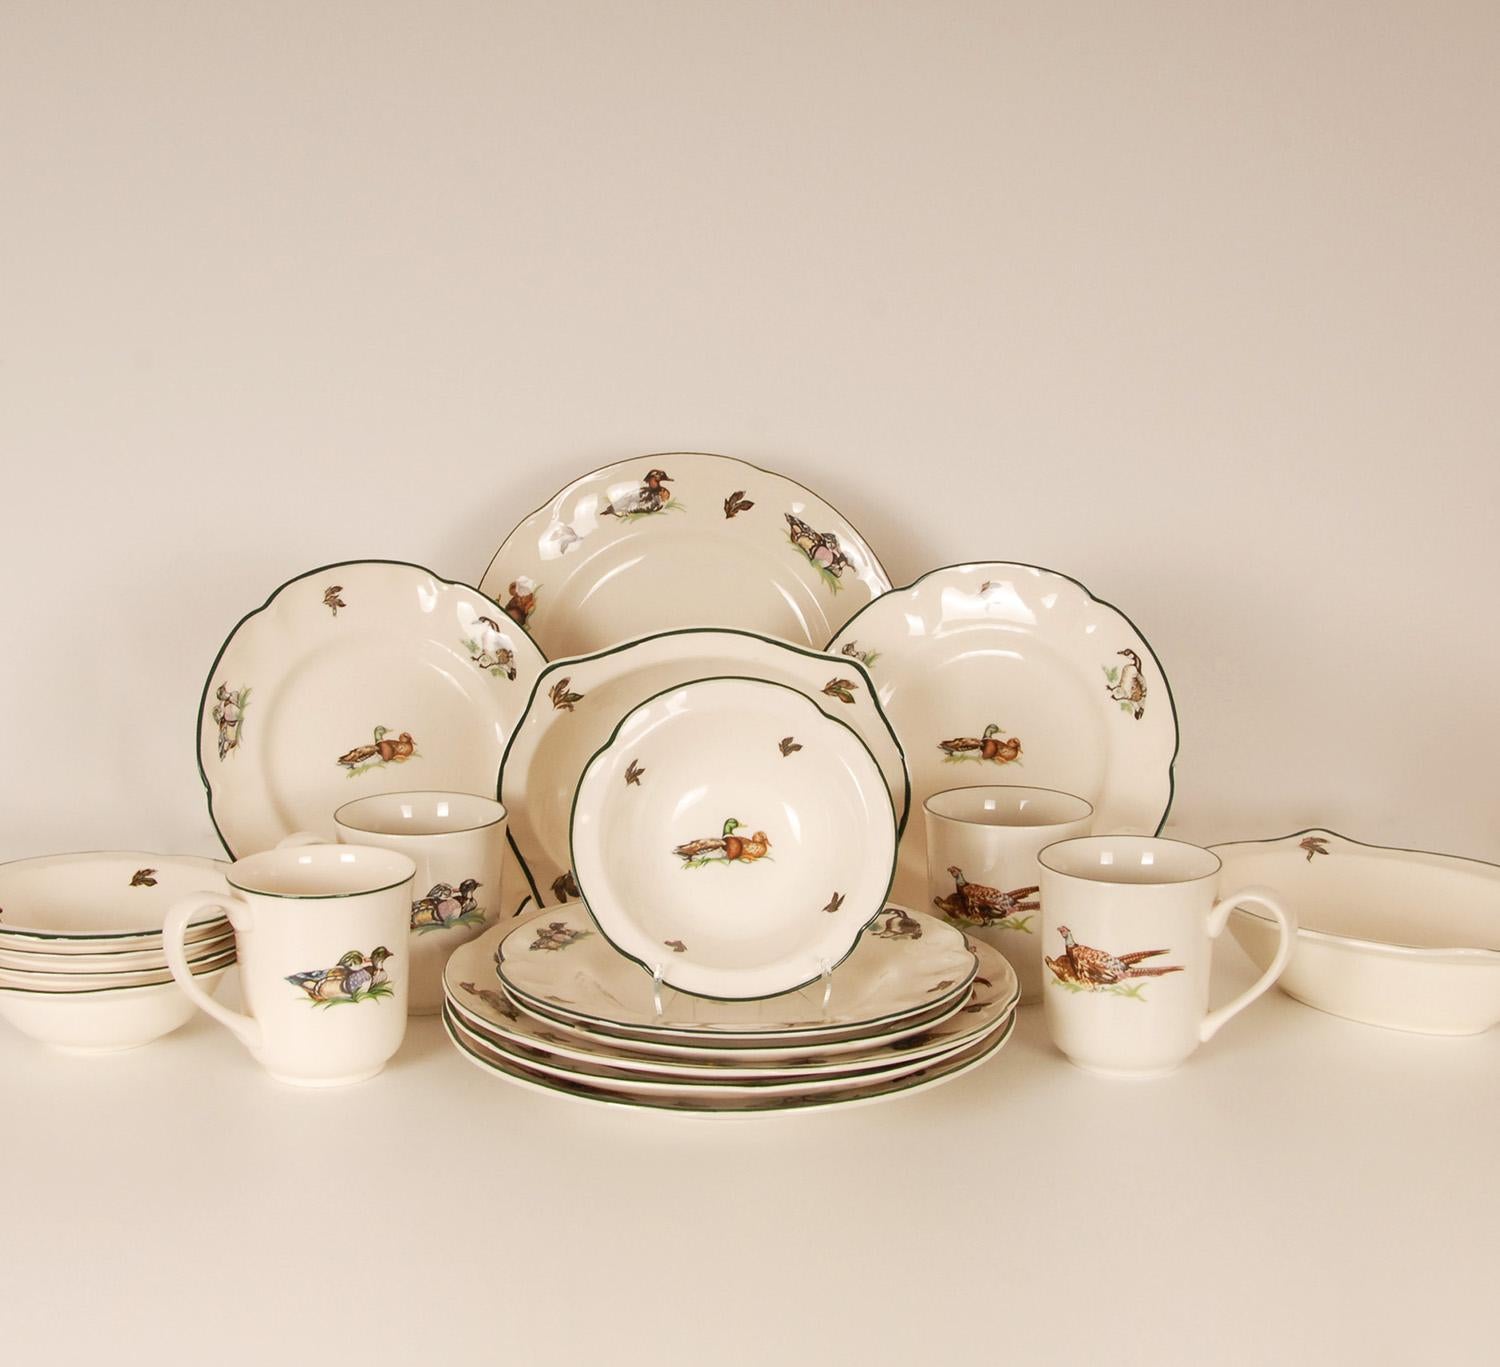 Stunning English fabulous porcelain - Bone China Dinner or Luncheon set from Johnson Brothers.
Decorated with the much coveted Brookshire pattern.
Fabulous featured with Ducks and pheasants. All the pieces are green trimmed. 
The set includes
- 4